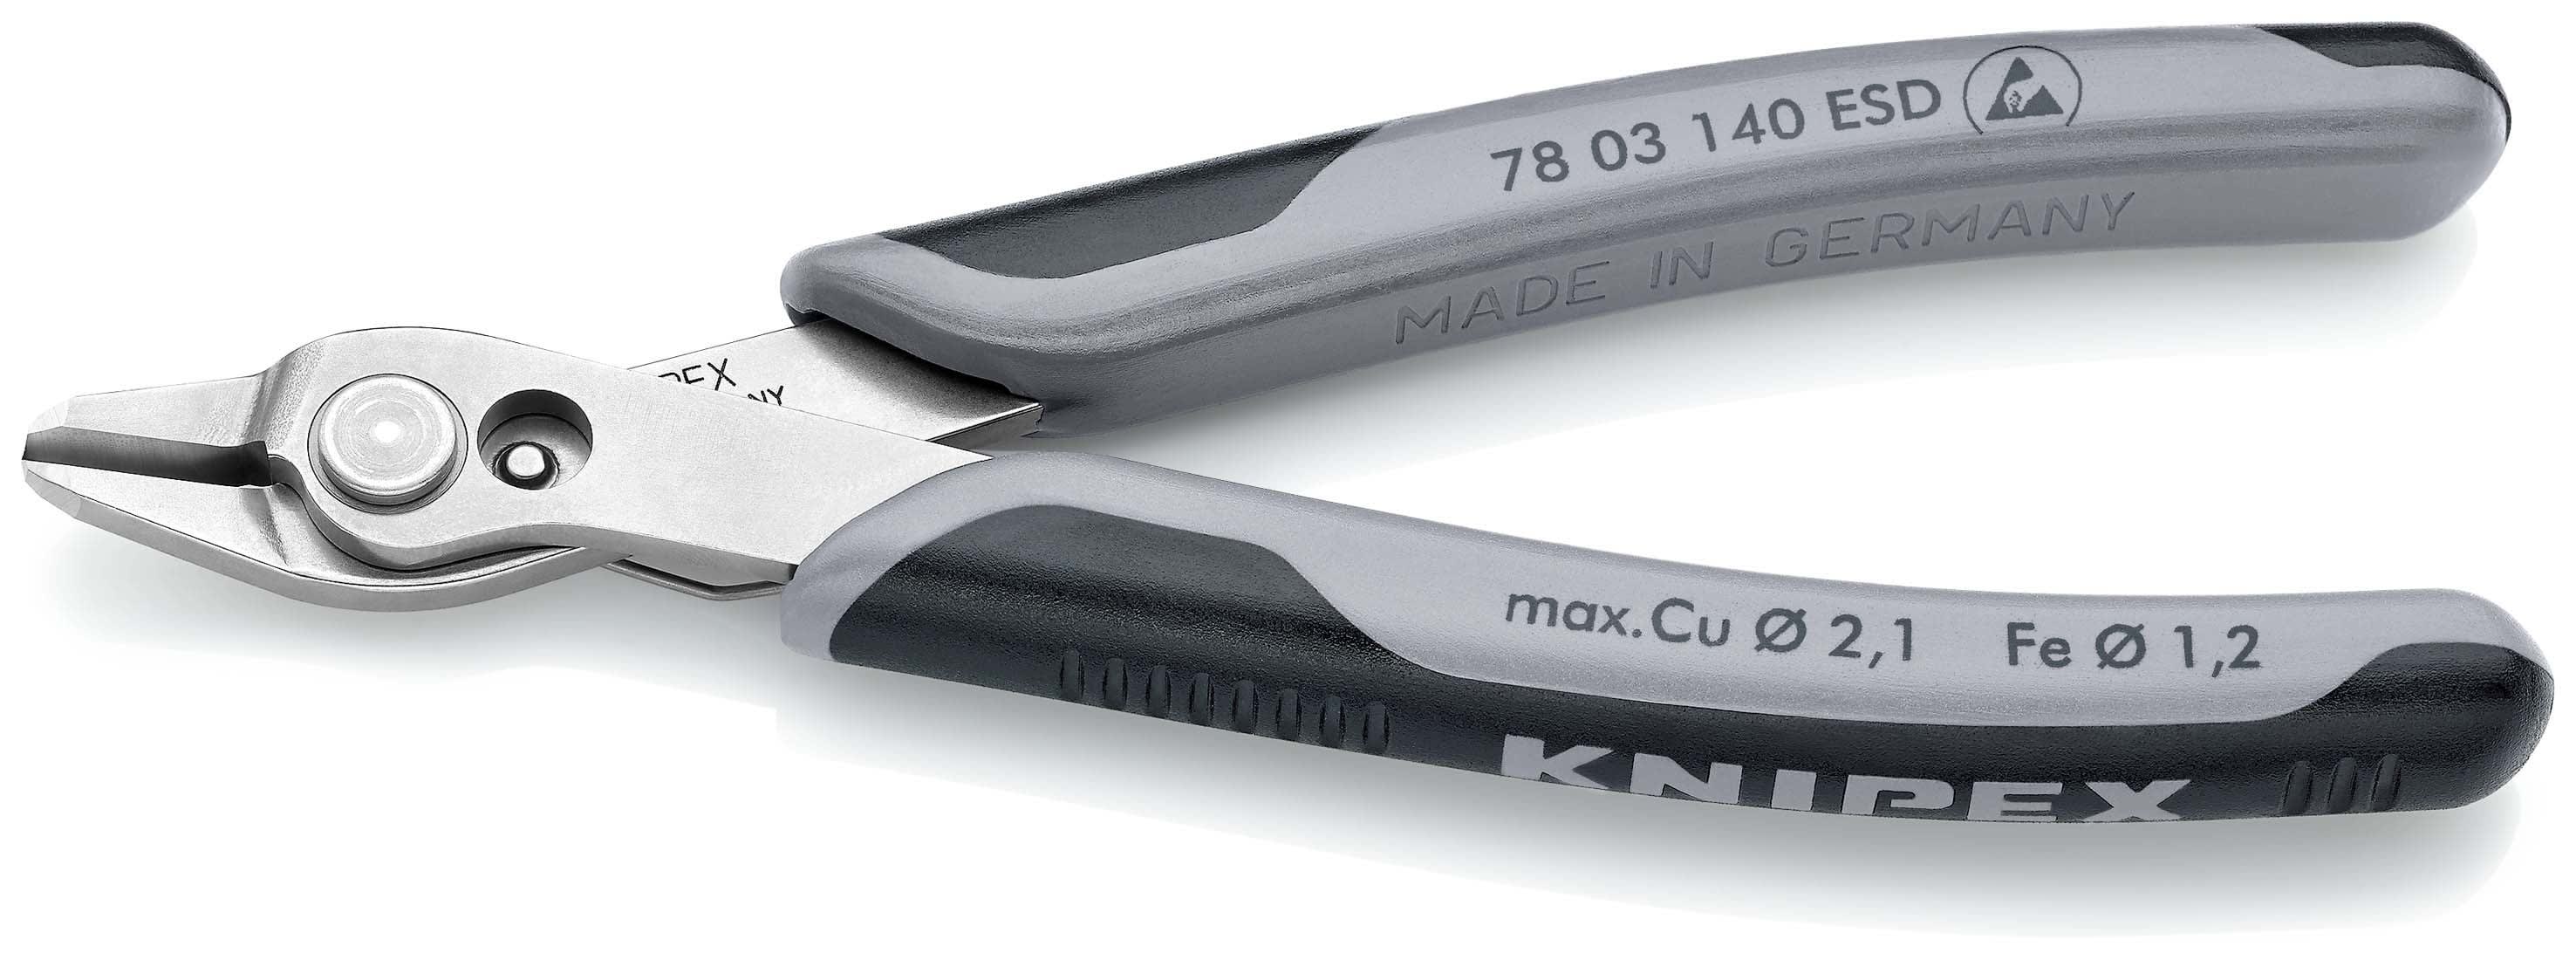 KNIPEX - Pince coupante electronique Super Knips XL 140mm - Gainage ESD